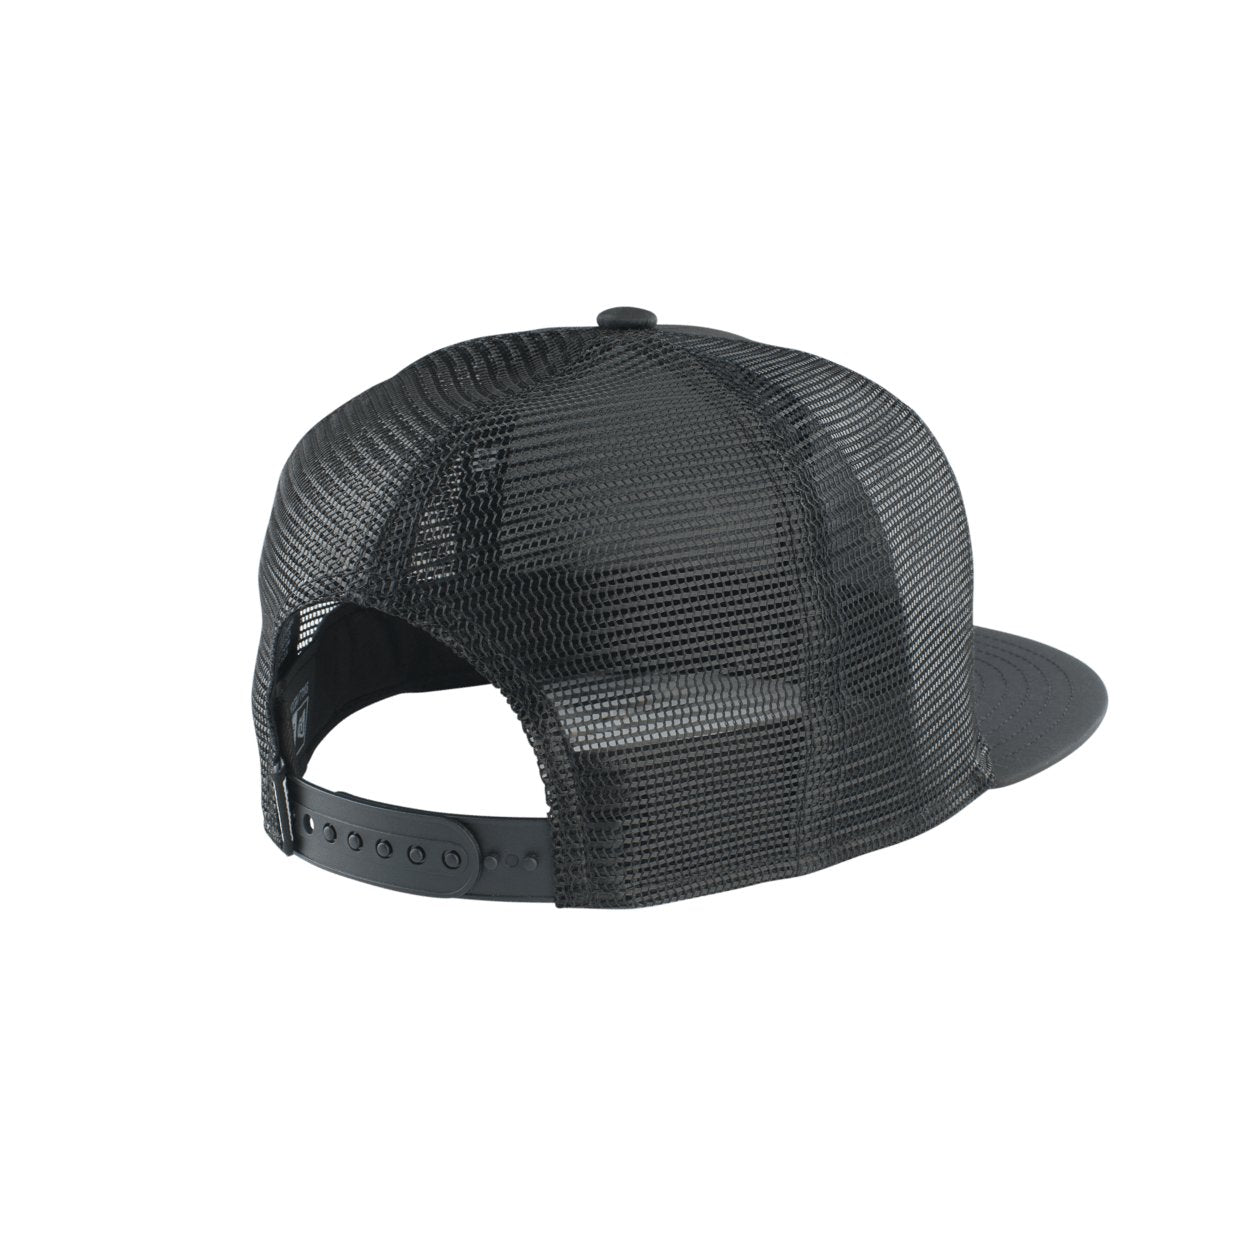 ION Cap Statement 2023 - Worthing Watersports - 9010583105840 - Apparel - ION Bike